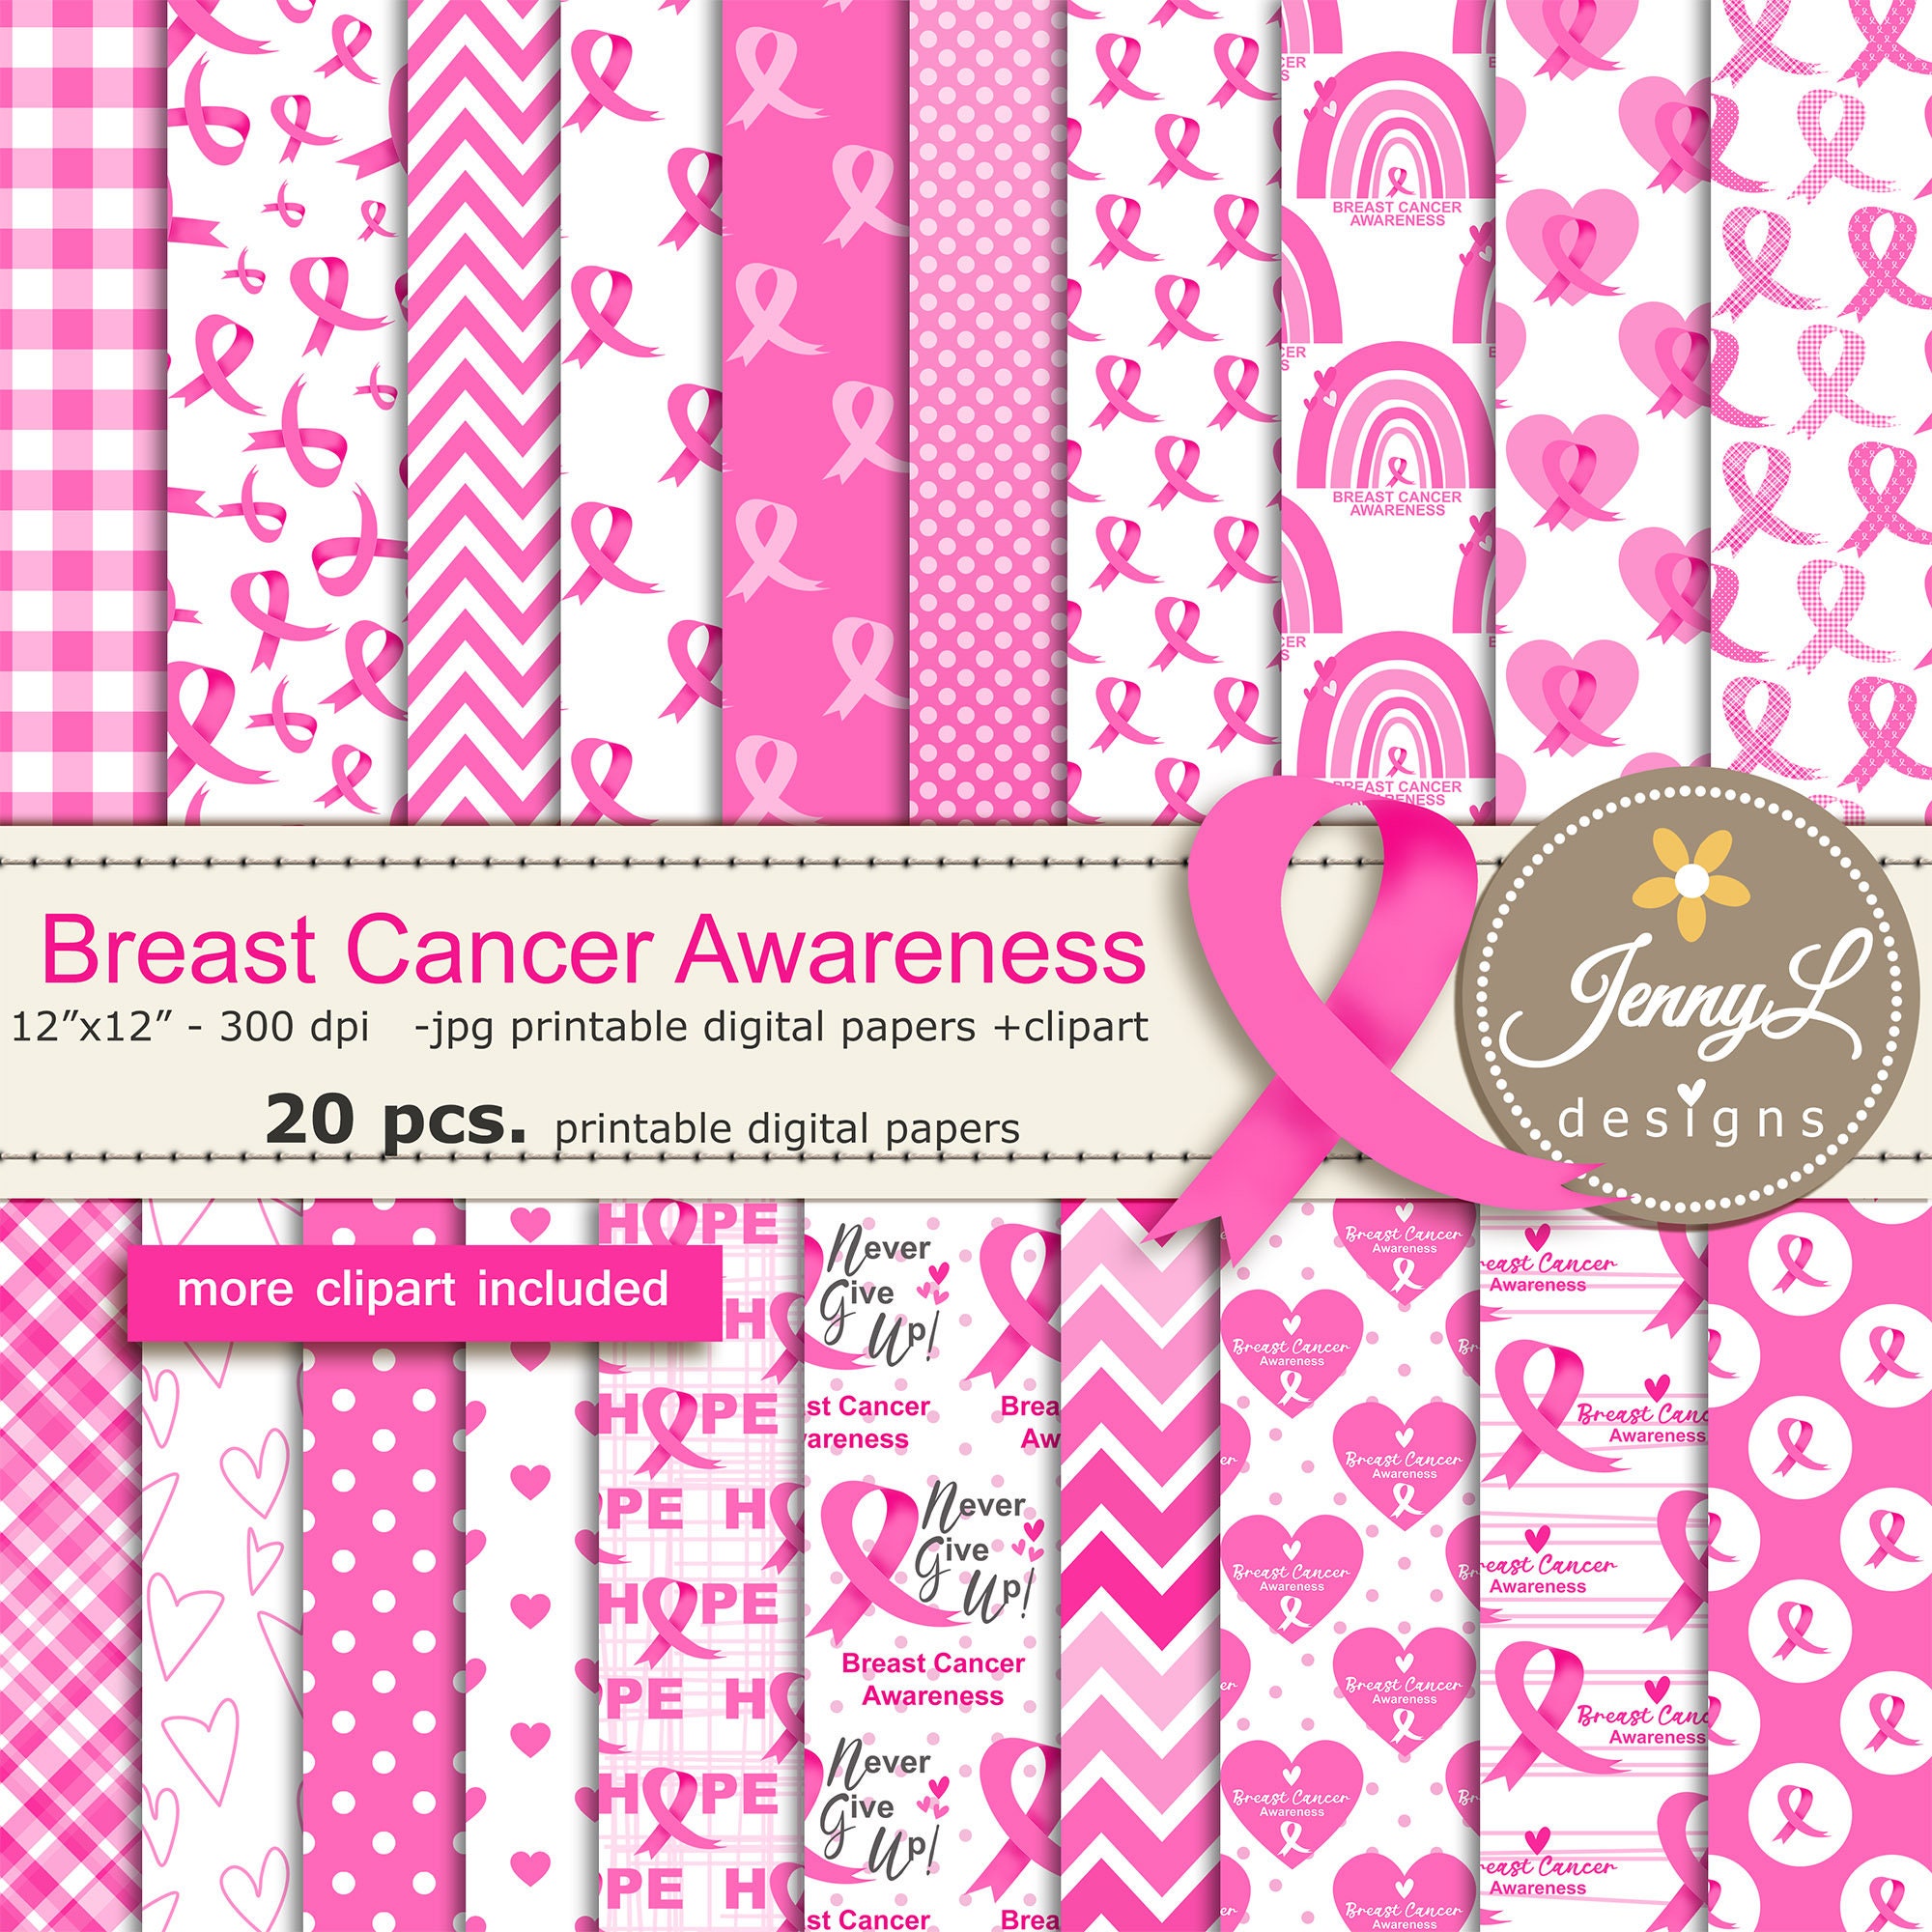 Breast Cancer Awareness Invitation picture